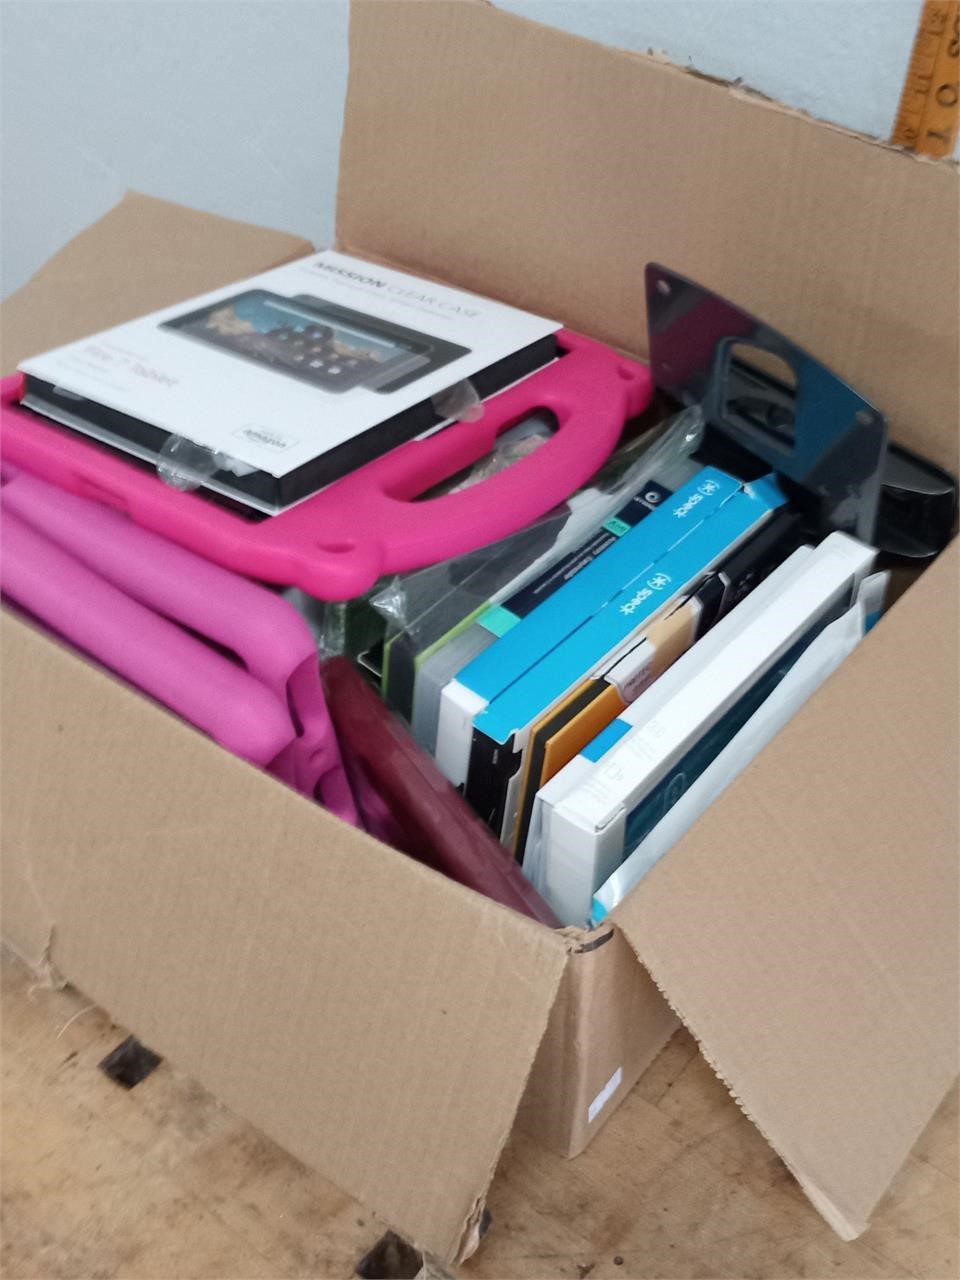 Box of Cell phone cases